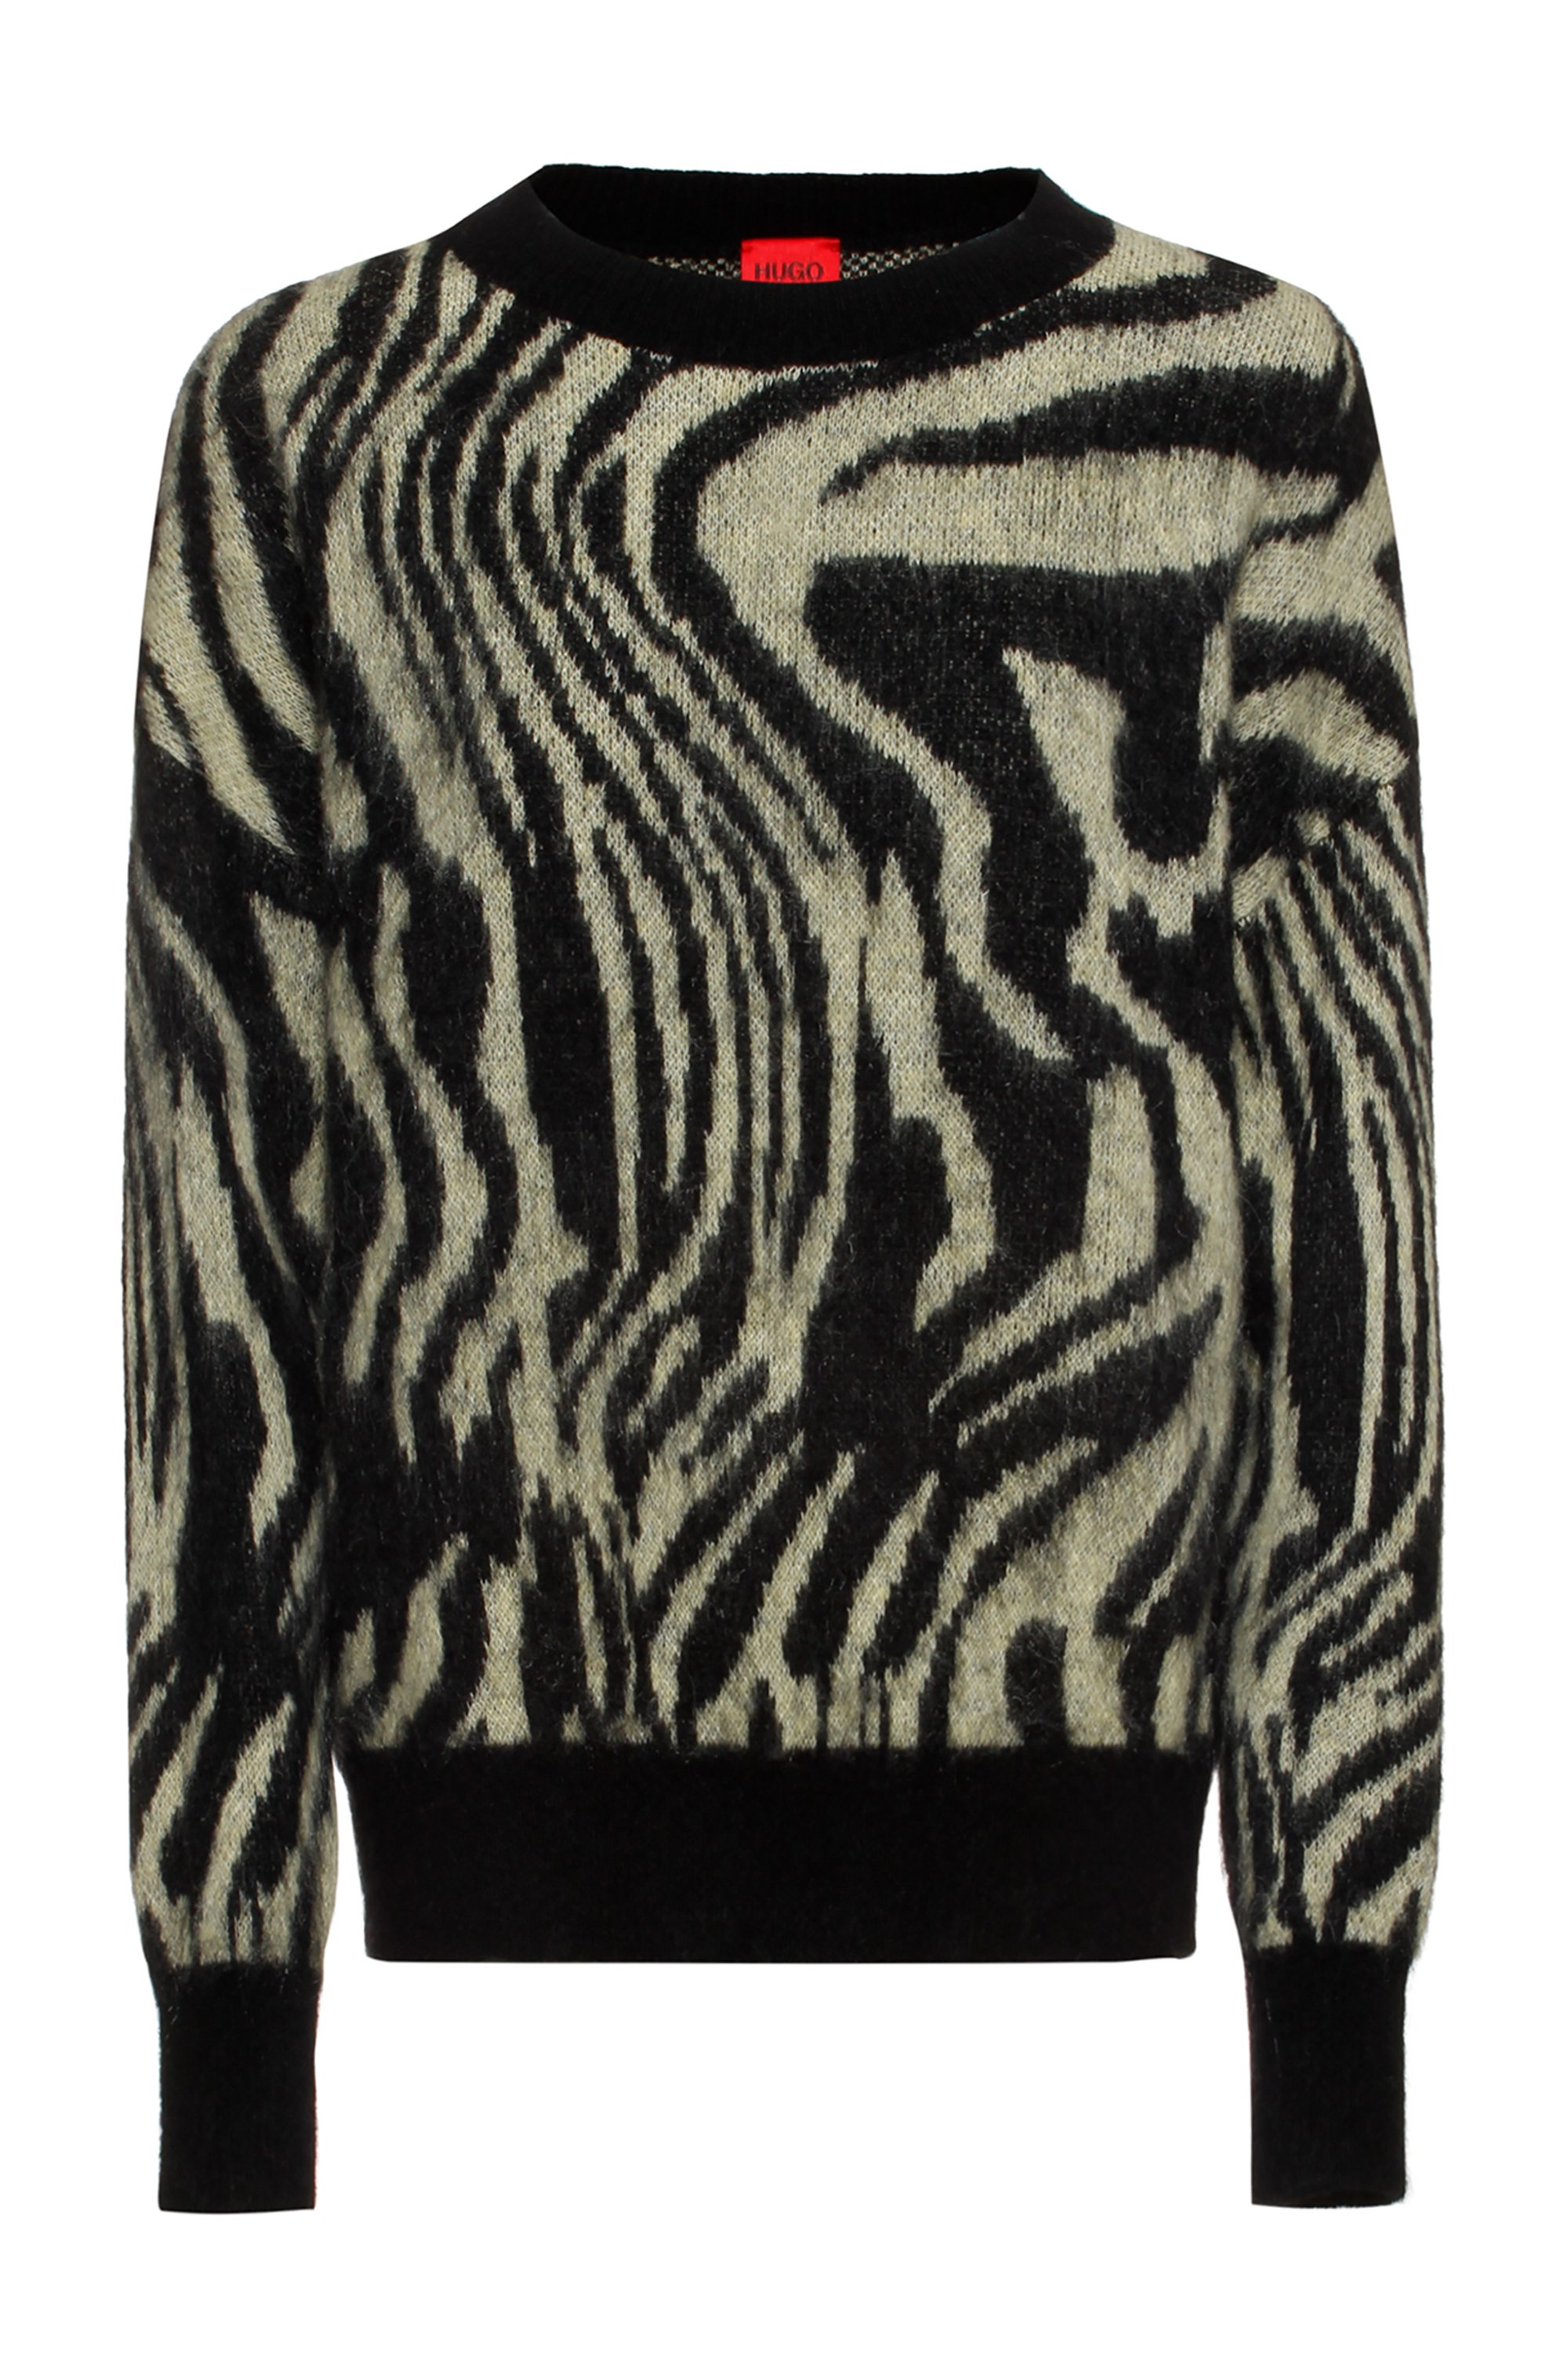 Knitted sweater with distorted zebra print in relaxed fit, Patterned